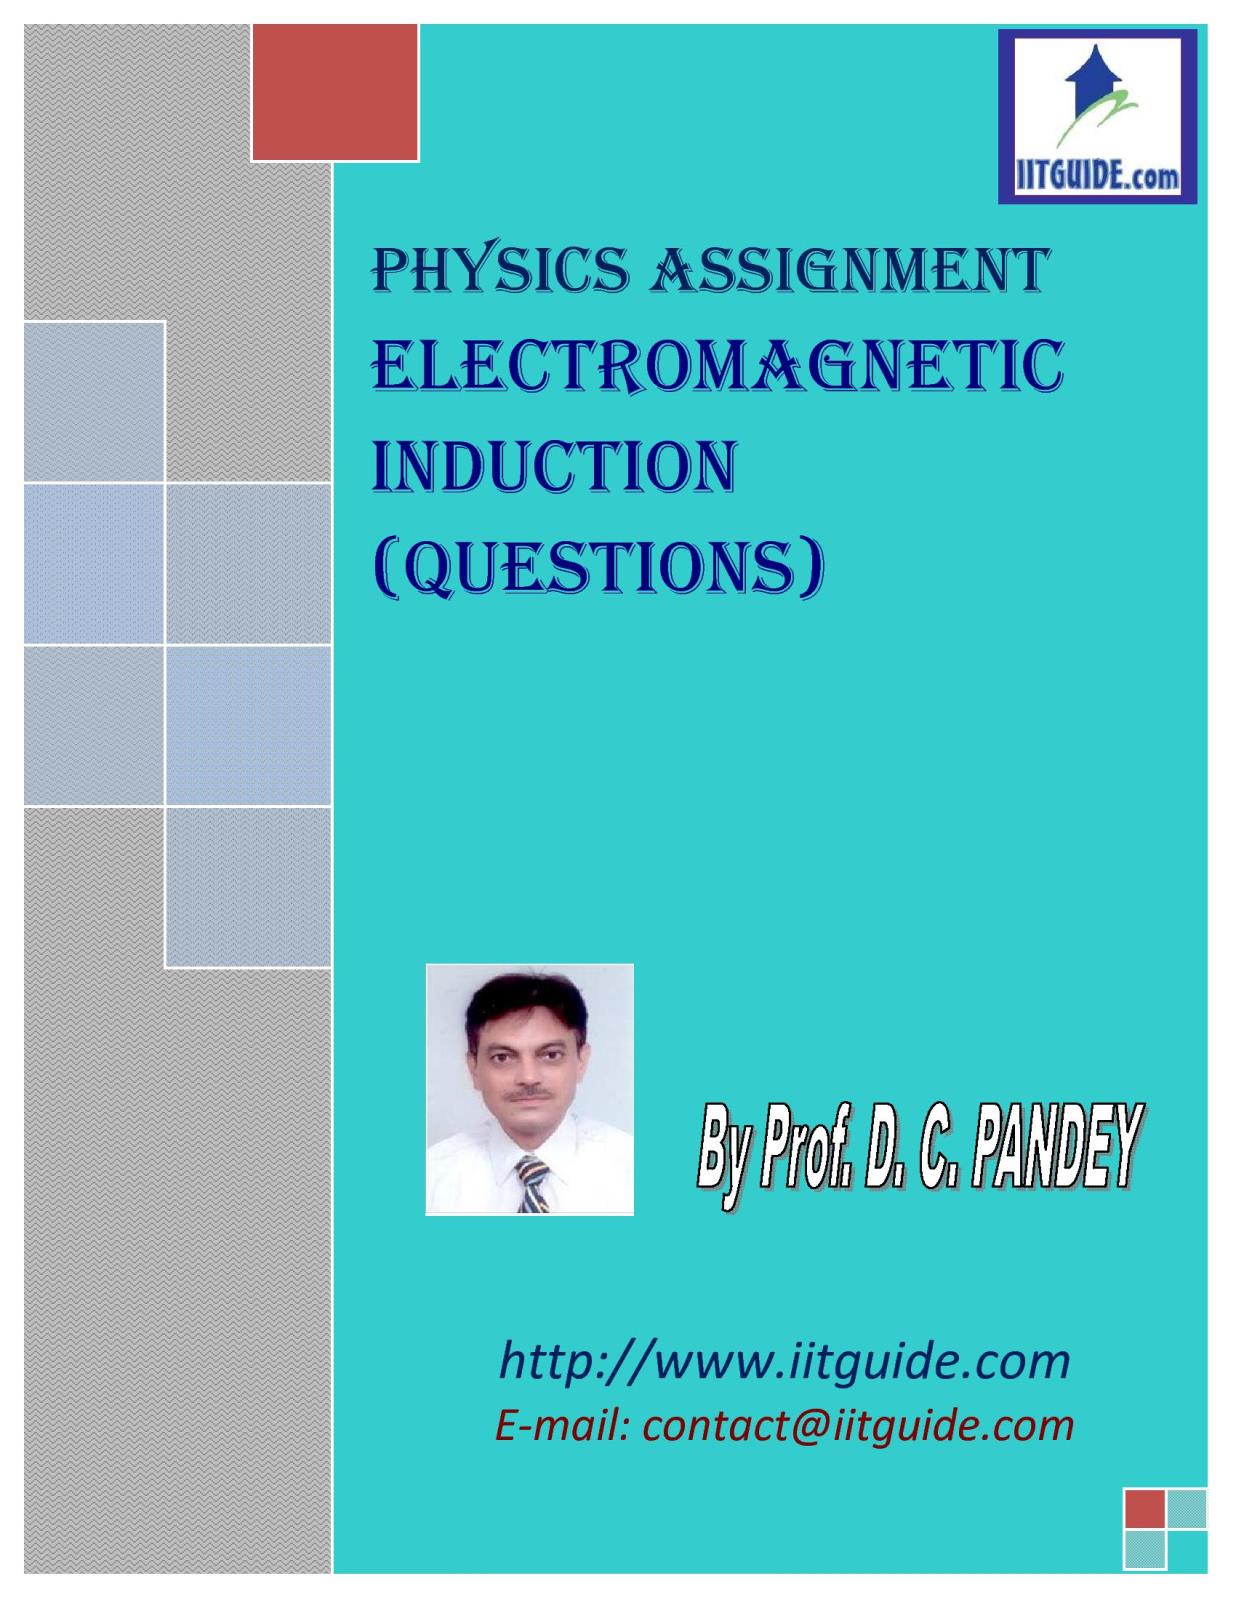 IIT JEE Main Advanced Physics Problems - Electromagnetic Induction